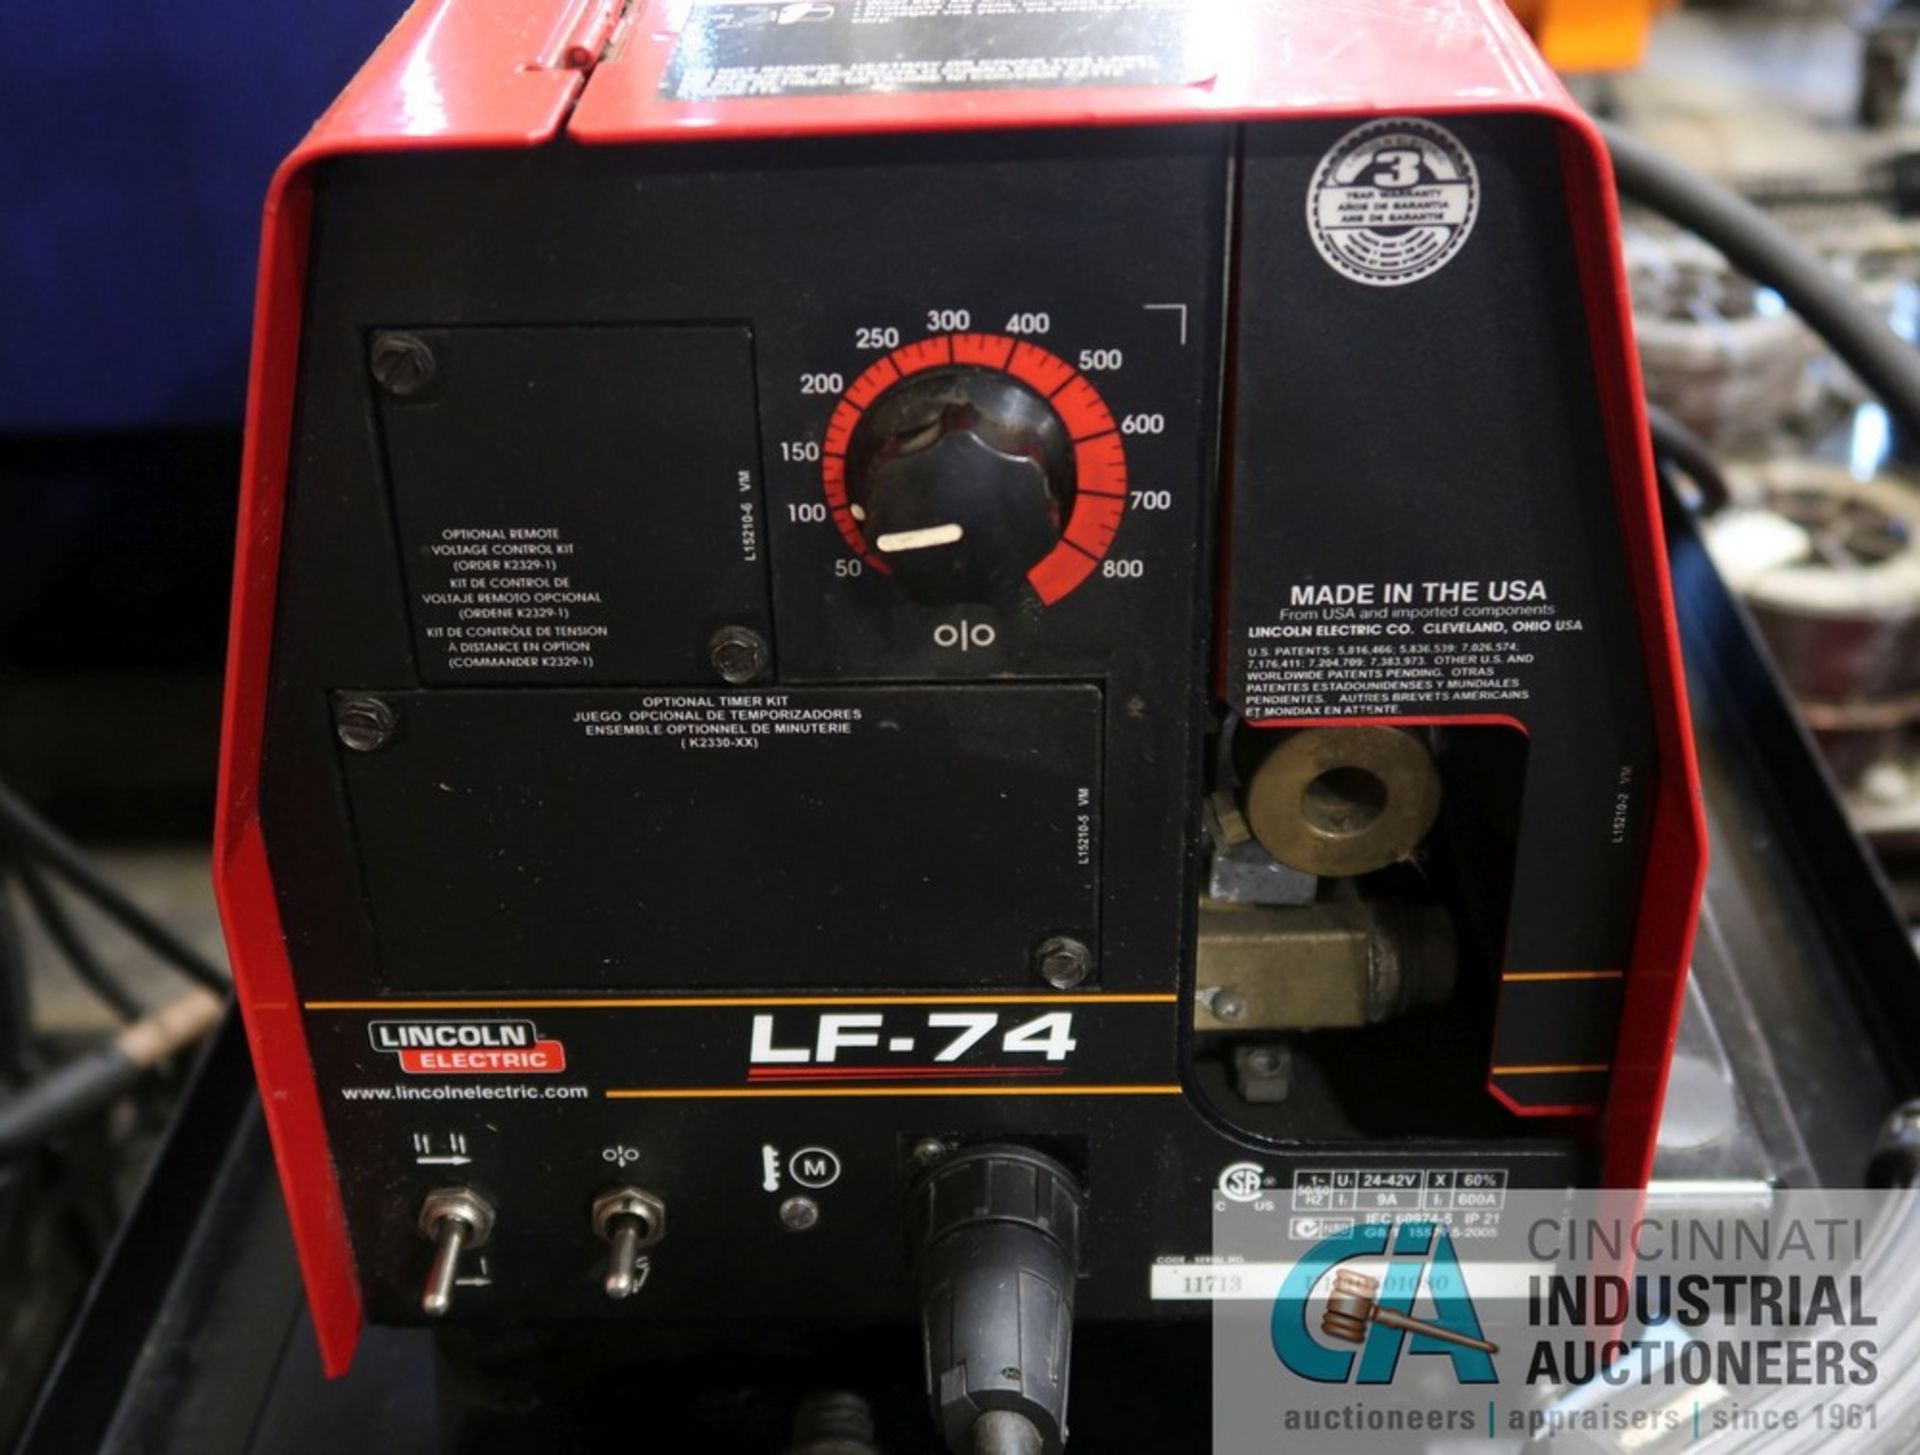 450 AMP LINCOLN ELECTRIC FLEXTEC 450 WELDING POWER SOURCE S/N U110613975 WITH LINCOLN ELECTRIC MODEL - Image 7 of 8